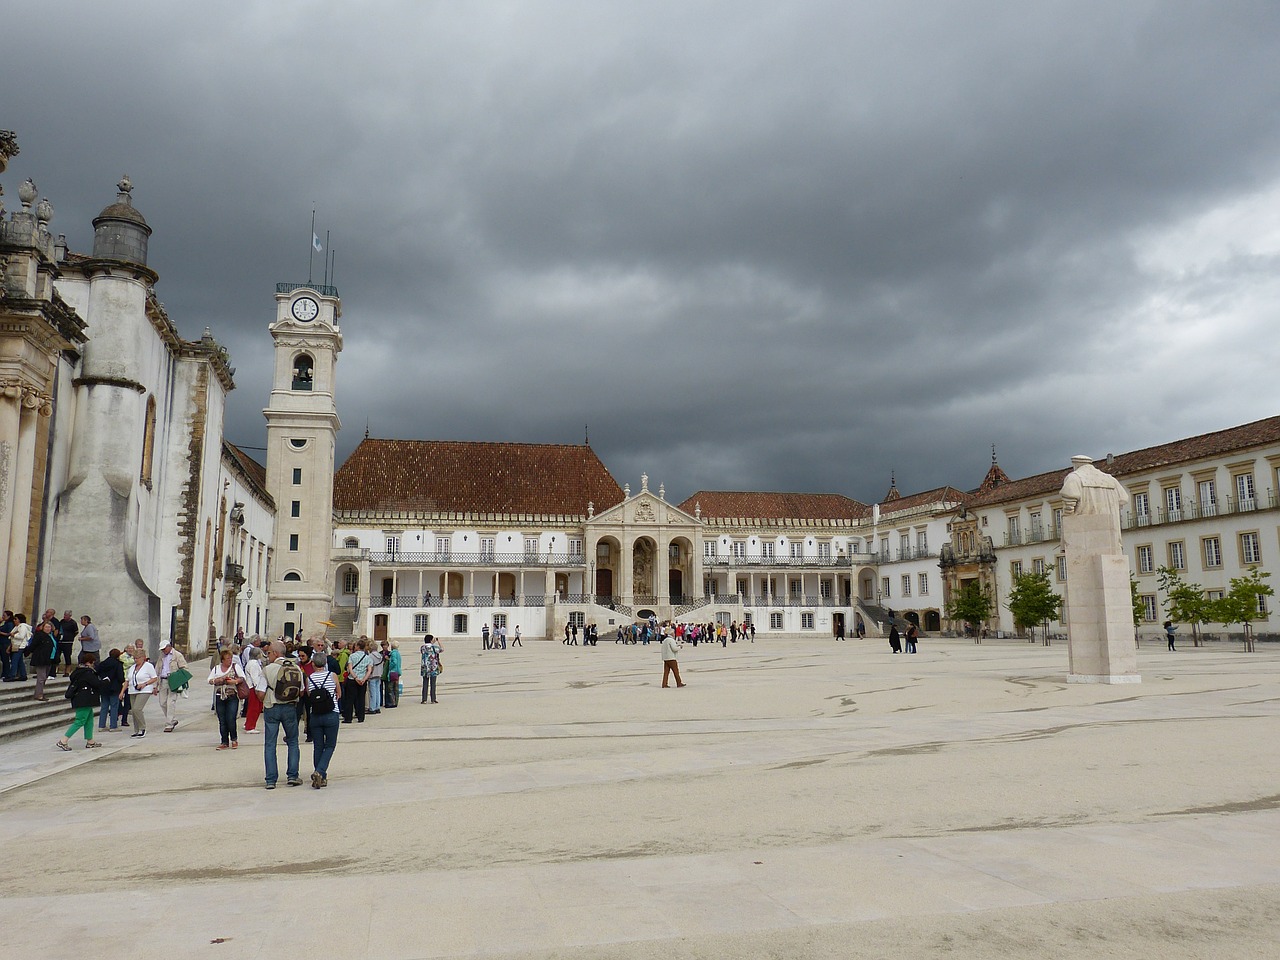 University of Coimbra - Top Attractions of Portugal